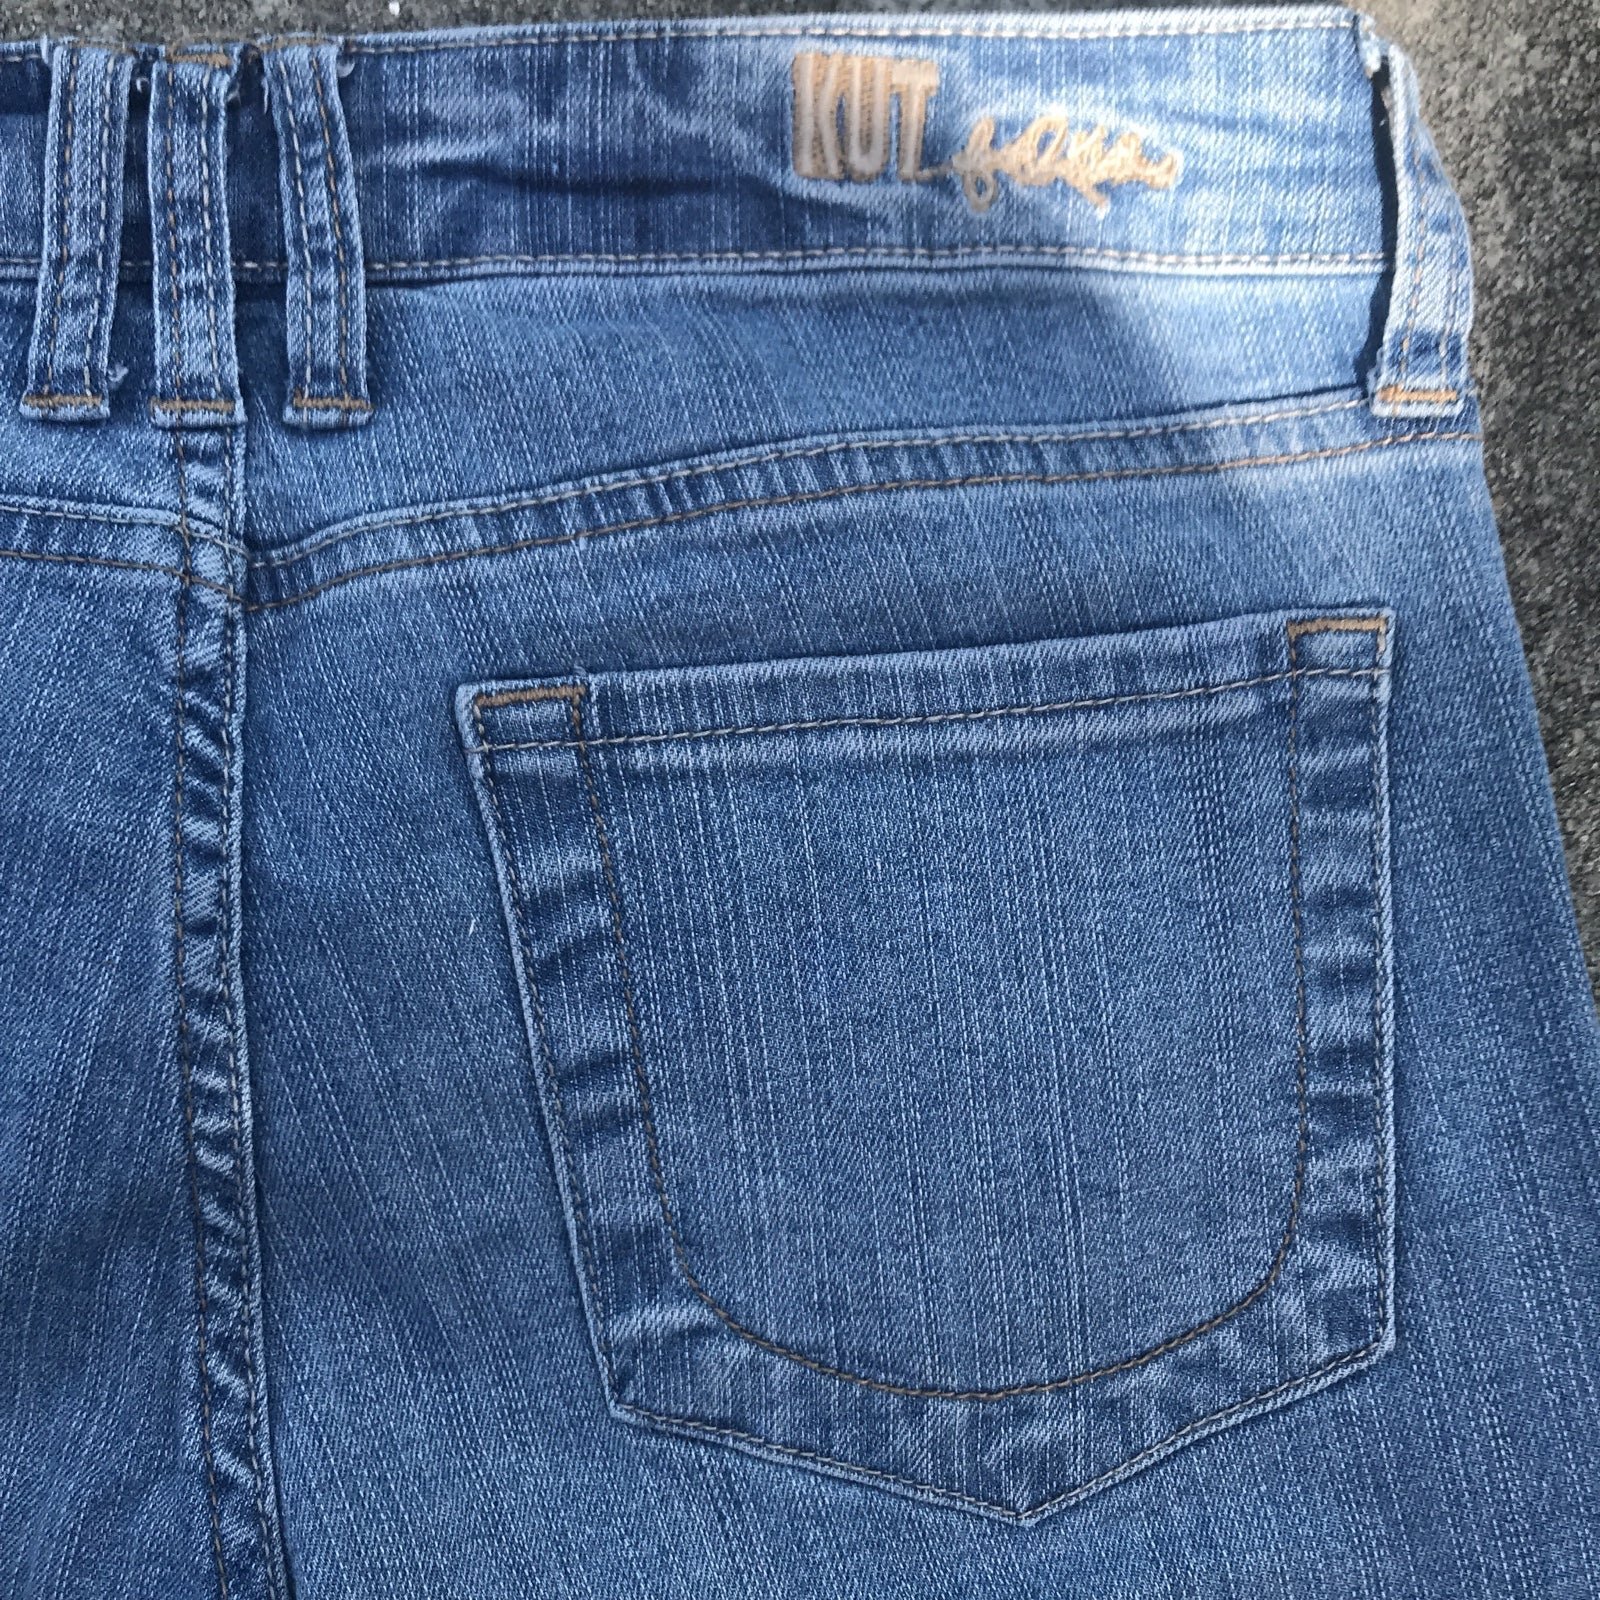 large selection Kut from the Kloth Slim Leg Jeans Size 2 / #14-238 oJy6ebl5u on sale